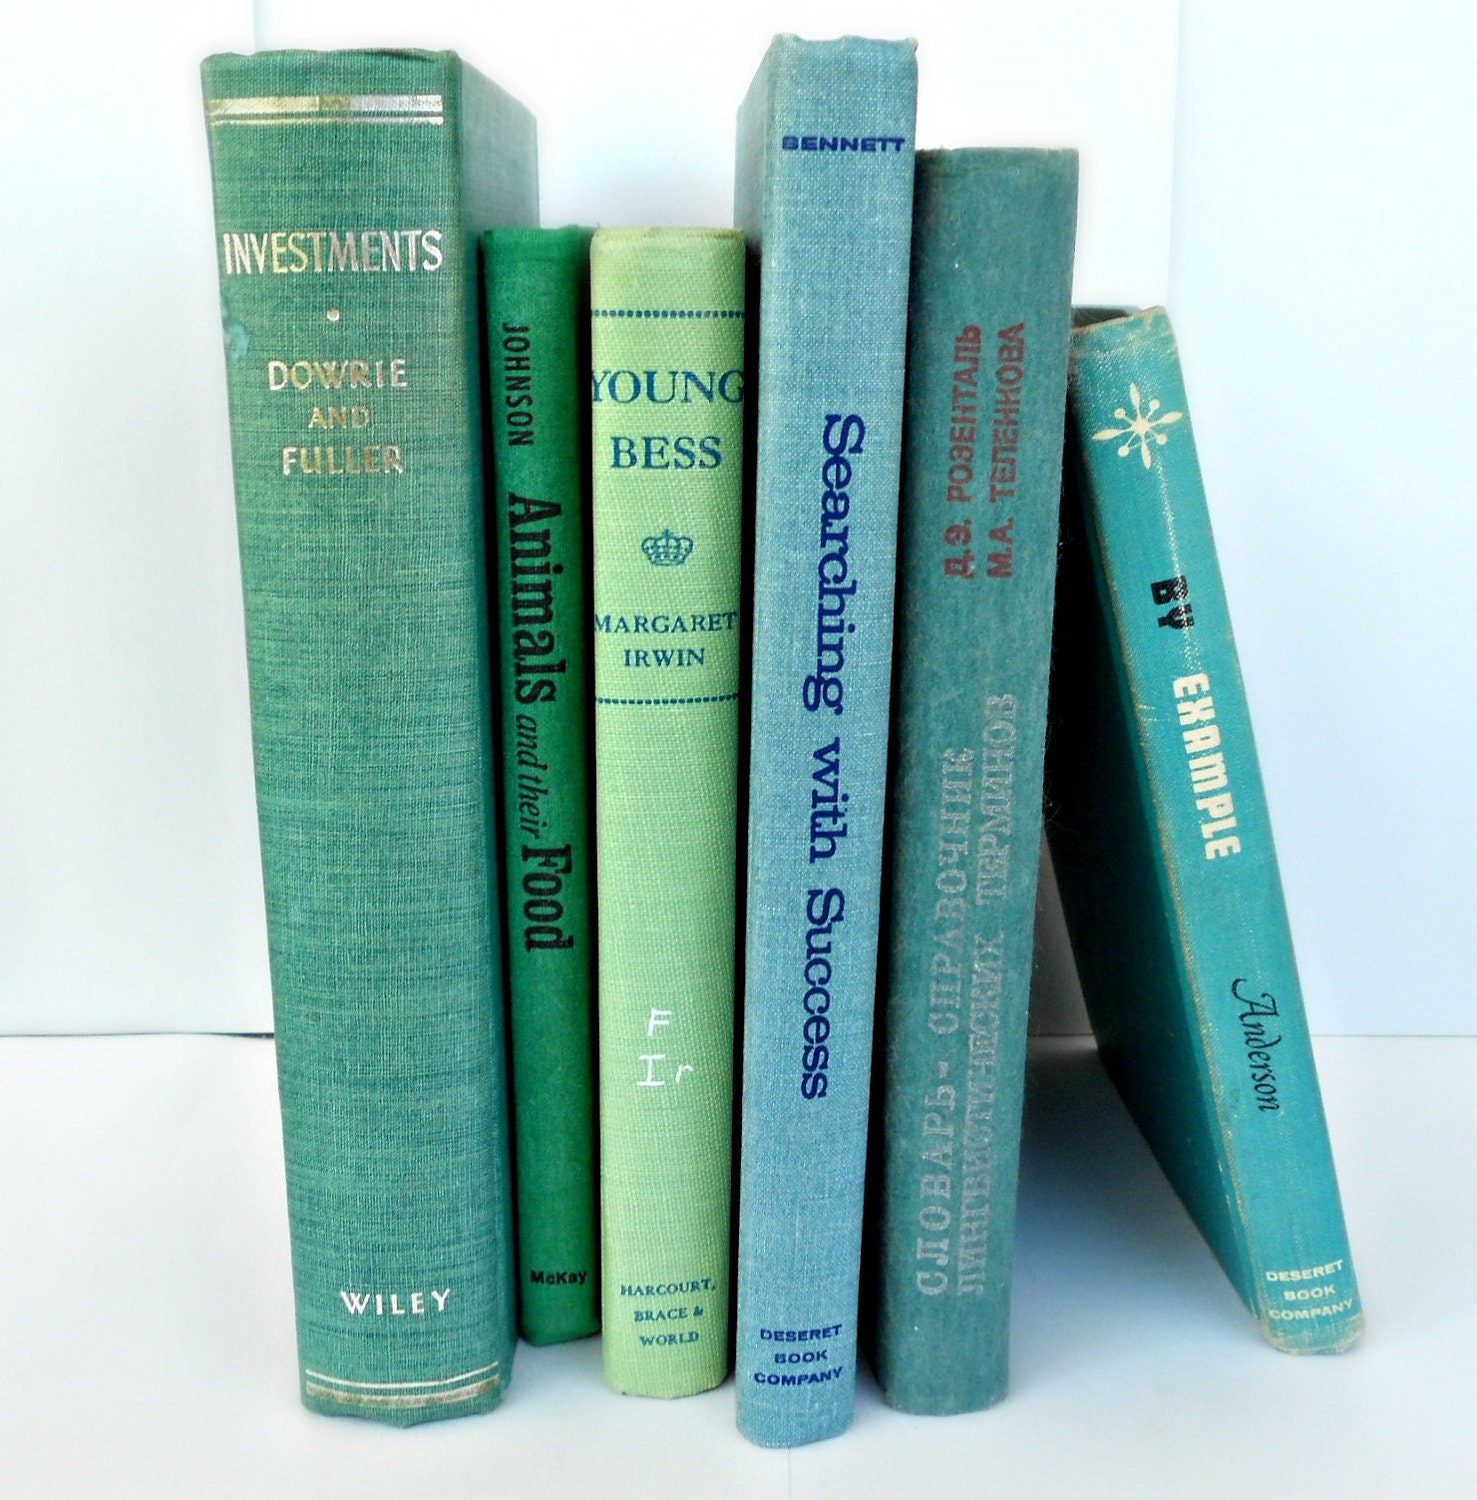 Instant Collection Vintage Books - Blue/Green/Teal